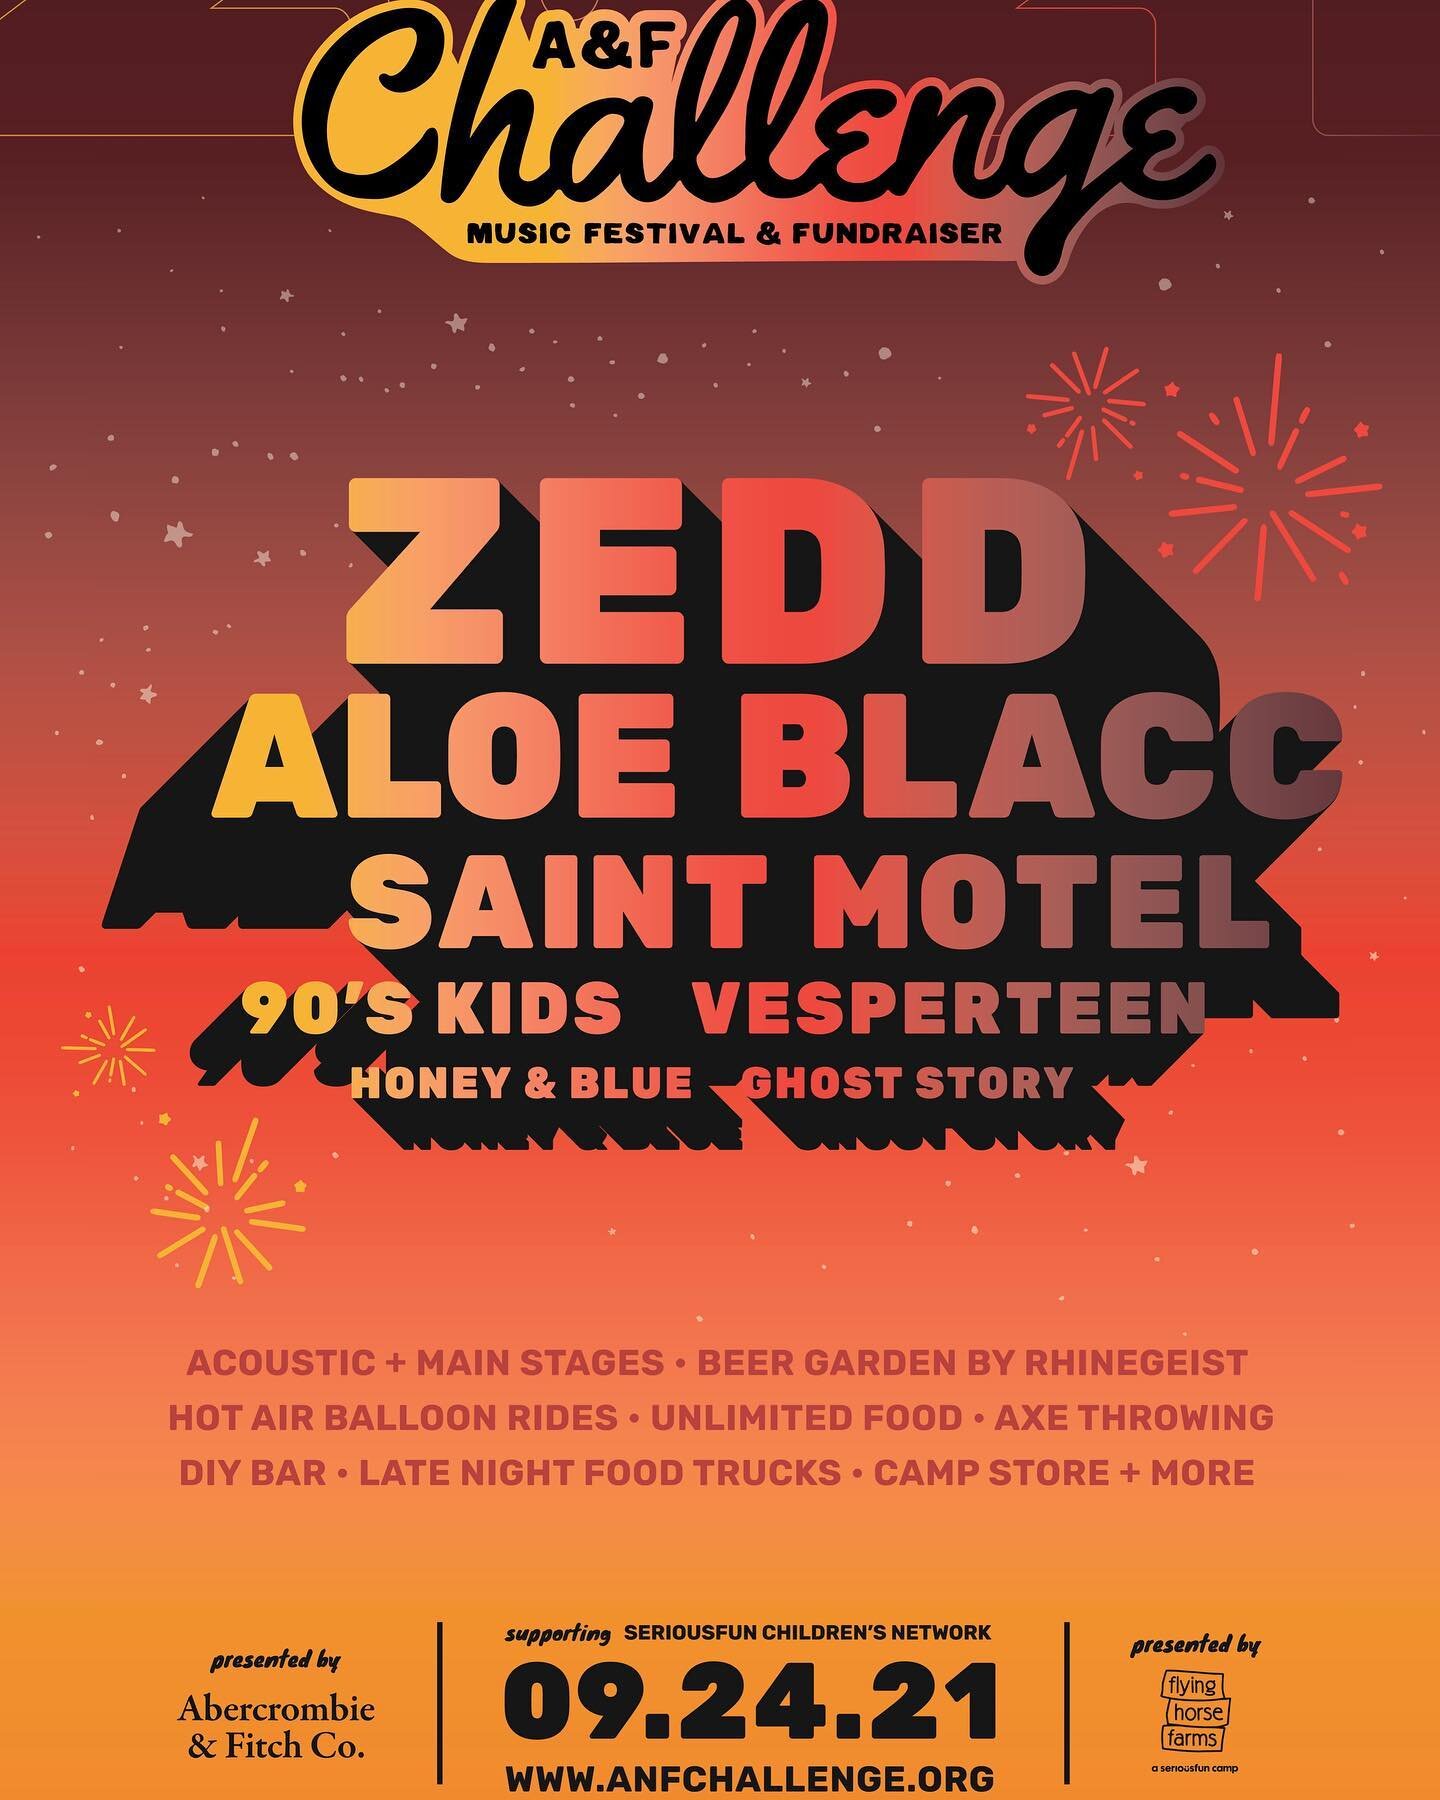 We are beyond excited to announce we&rsquo;ll be playing the Camp Stage at the 2021 A&amp;F Challenge! Not only is this event full of music, food, drinks and other fun activities, but it has raised over $12 MILLION DOLLARS since 2016 to support Serio